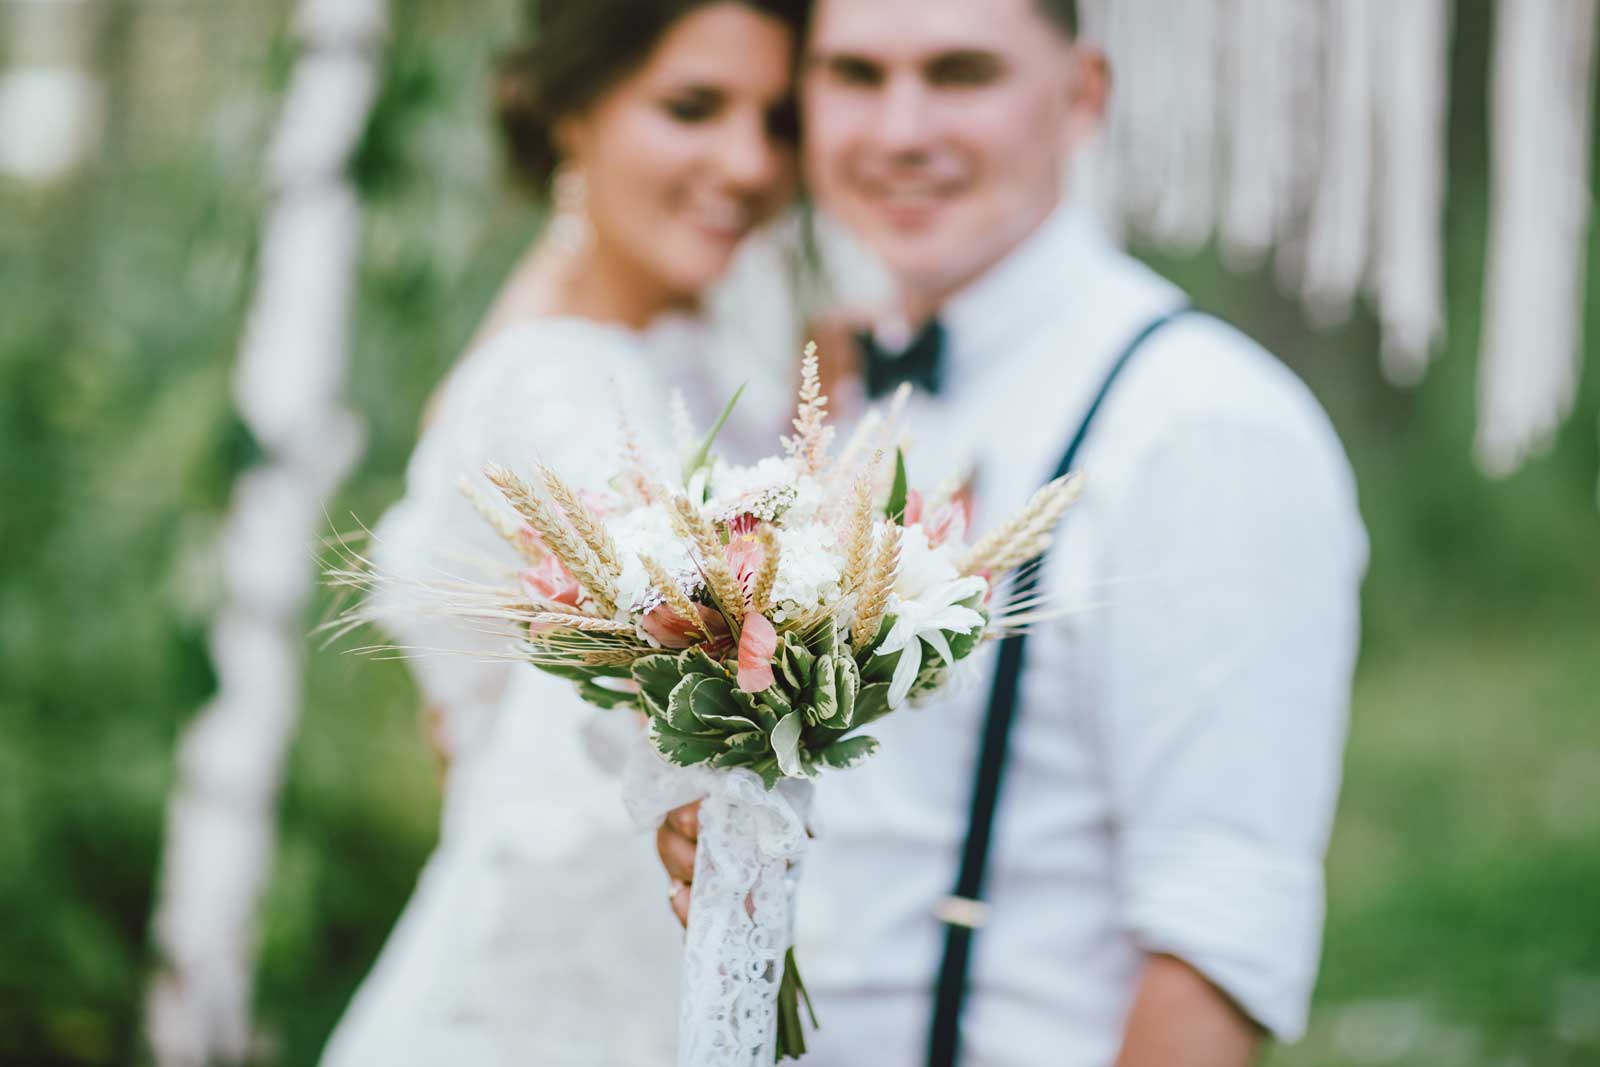 bg-header-1-happy-newly-married-couple-with-boho-style-bouquet-N26JKP7.jpg